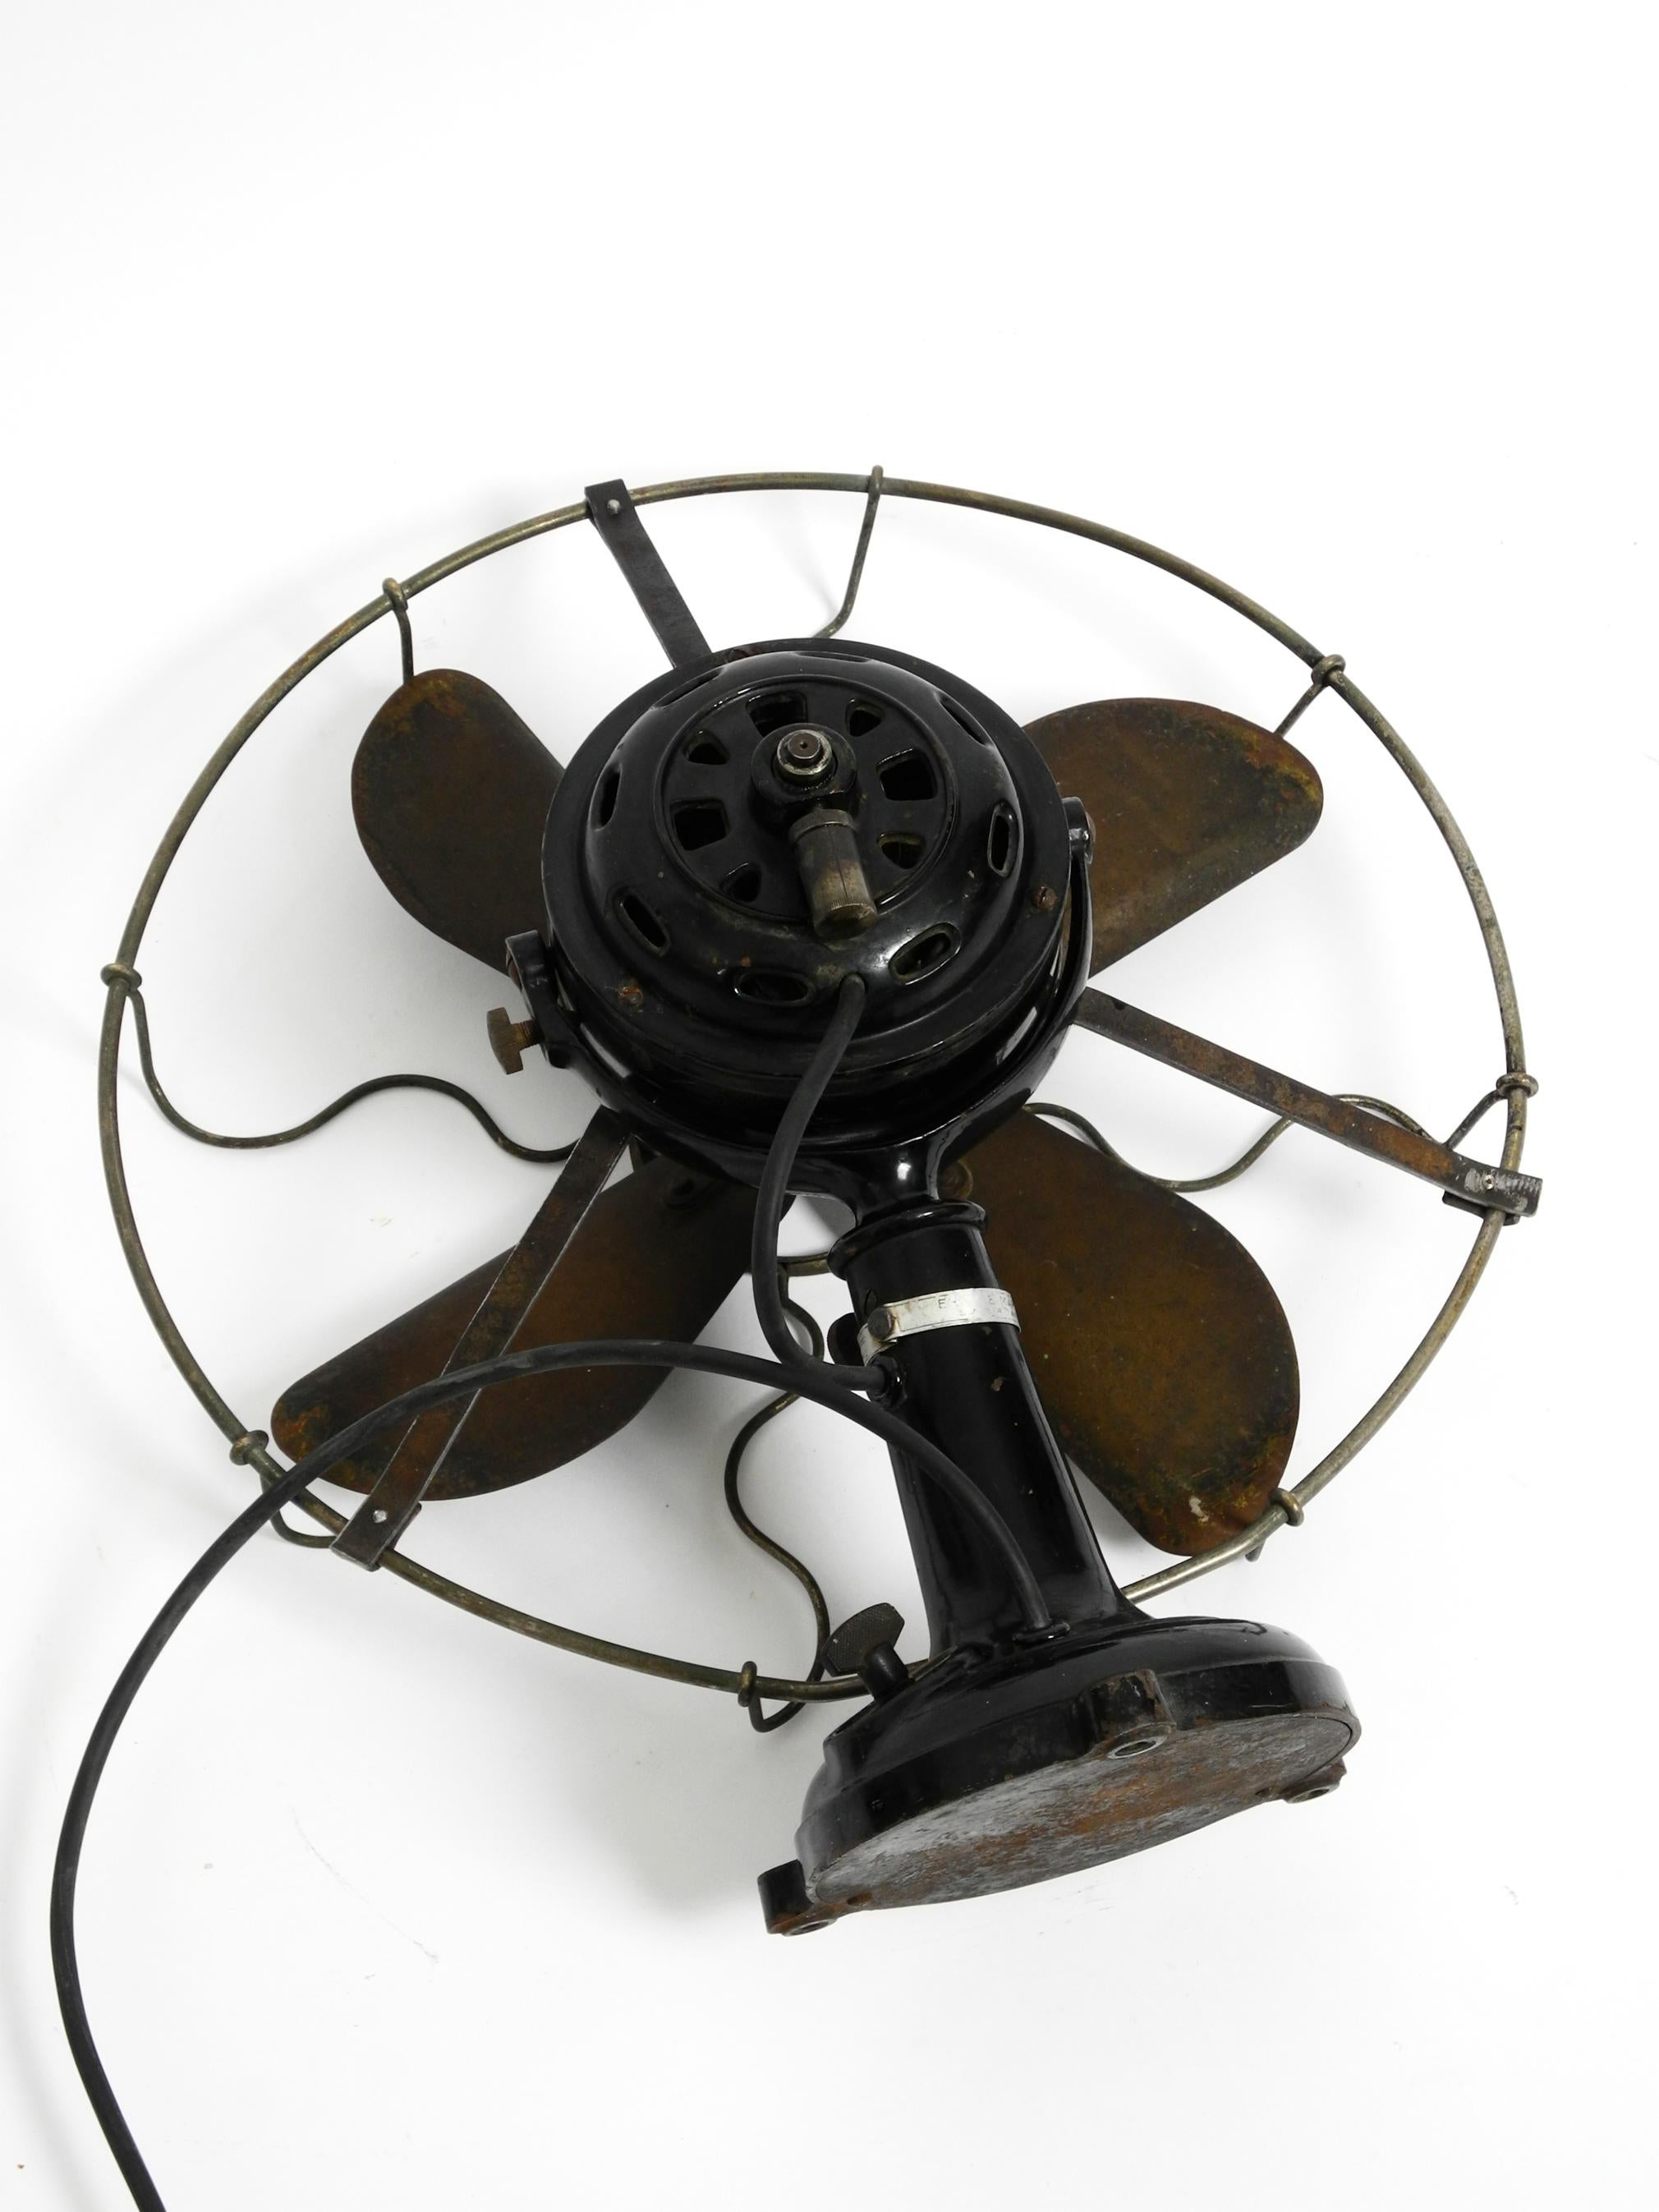 Huge Heavy Original 1930s Industrial Metal Table Fan by Marelli Made in Italy 11